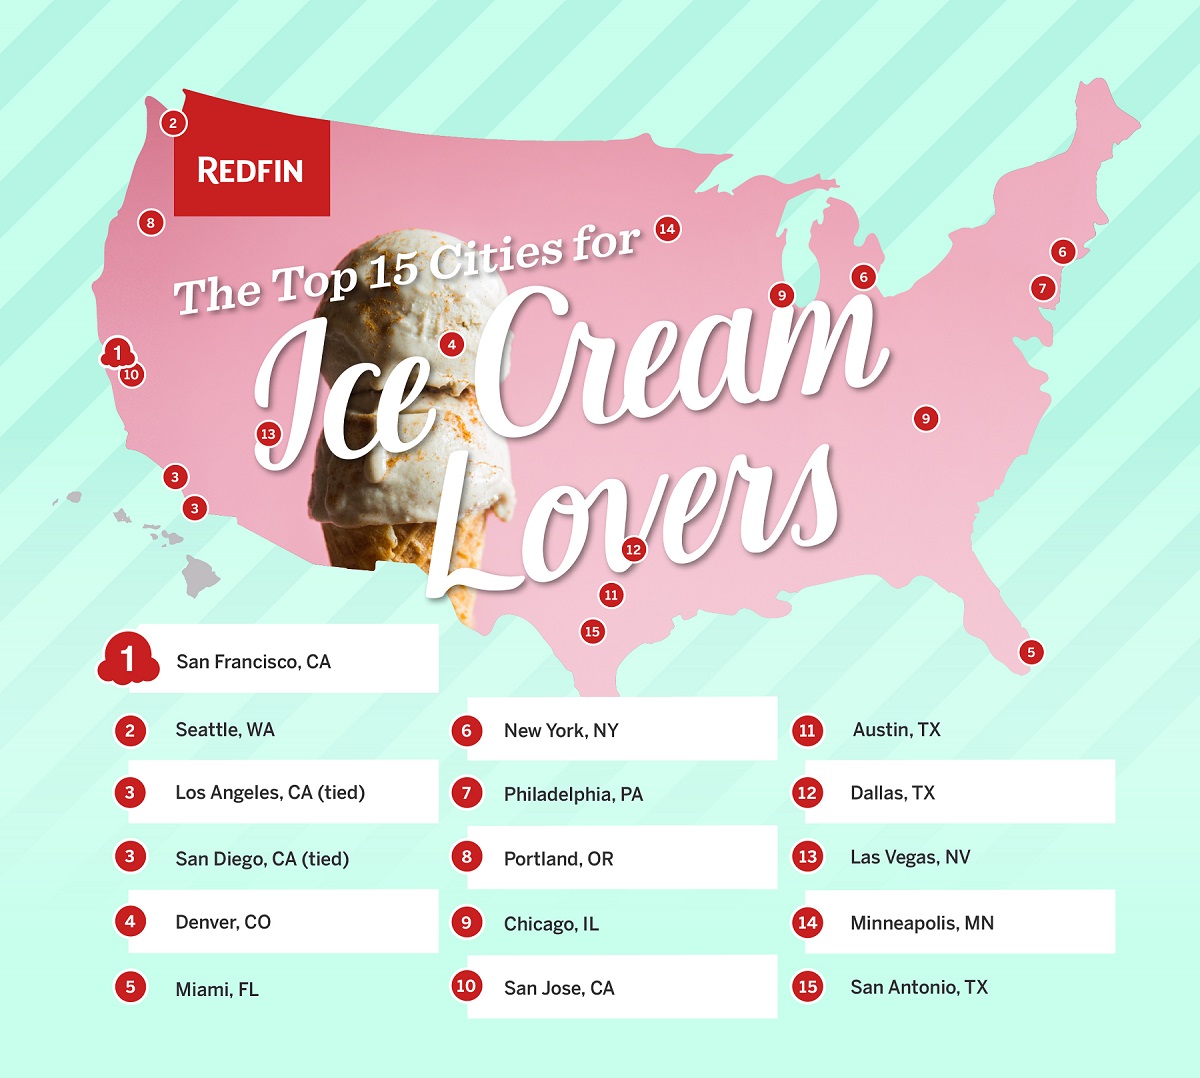 Best United States Cities for Ice Cream Lovers